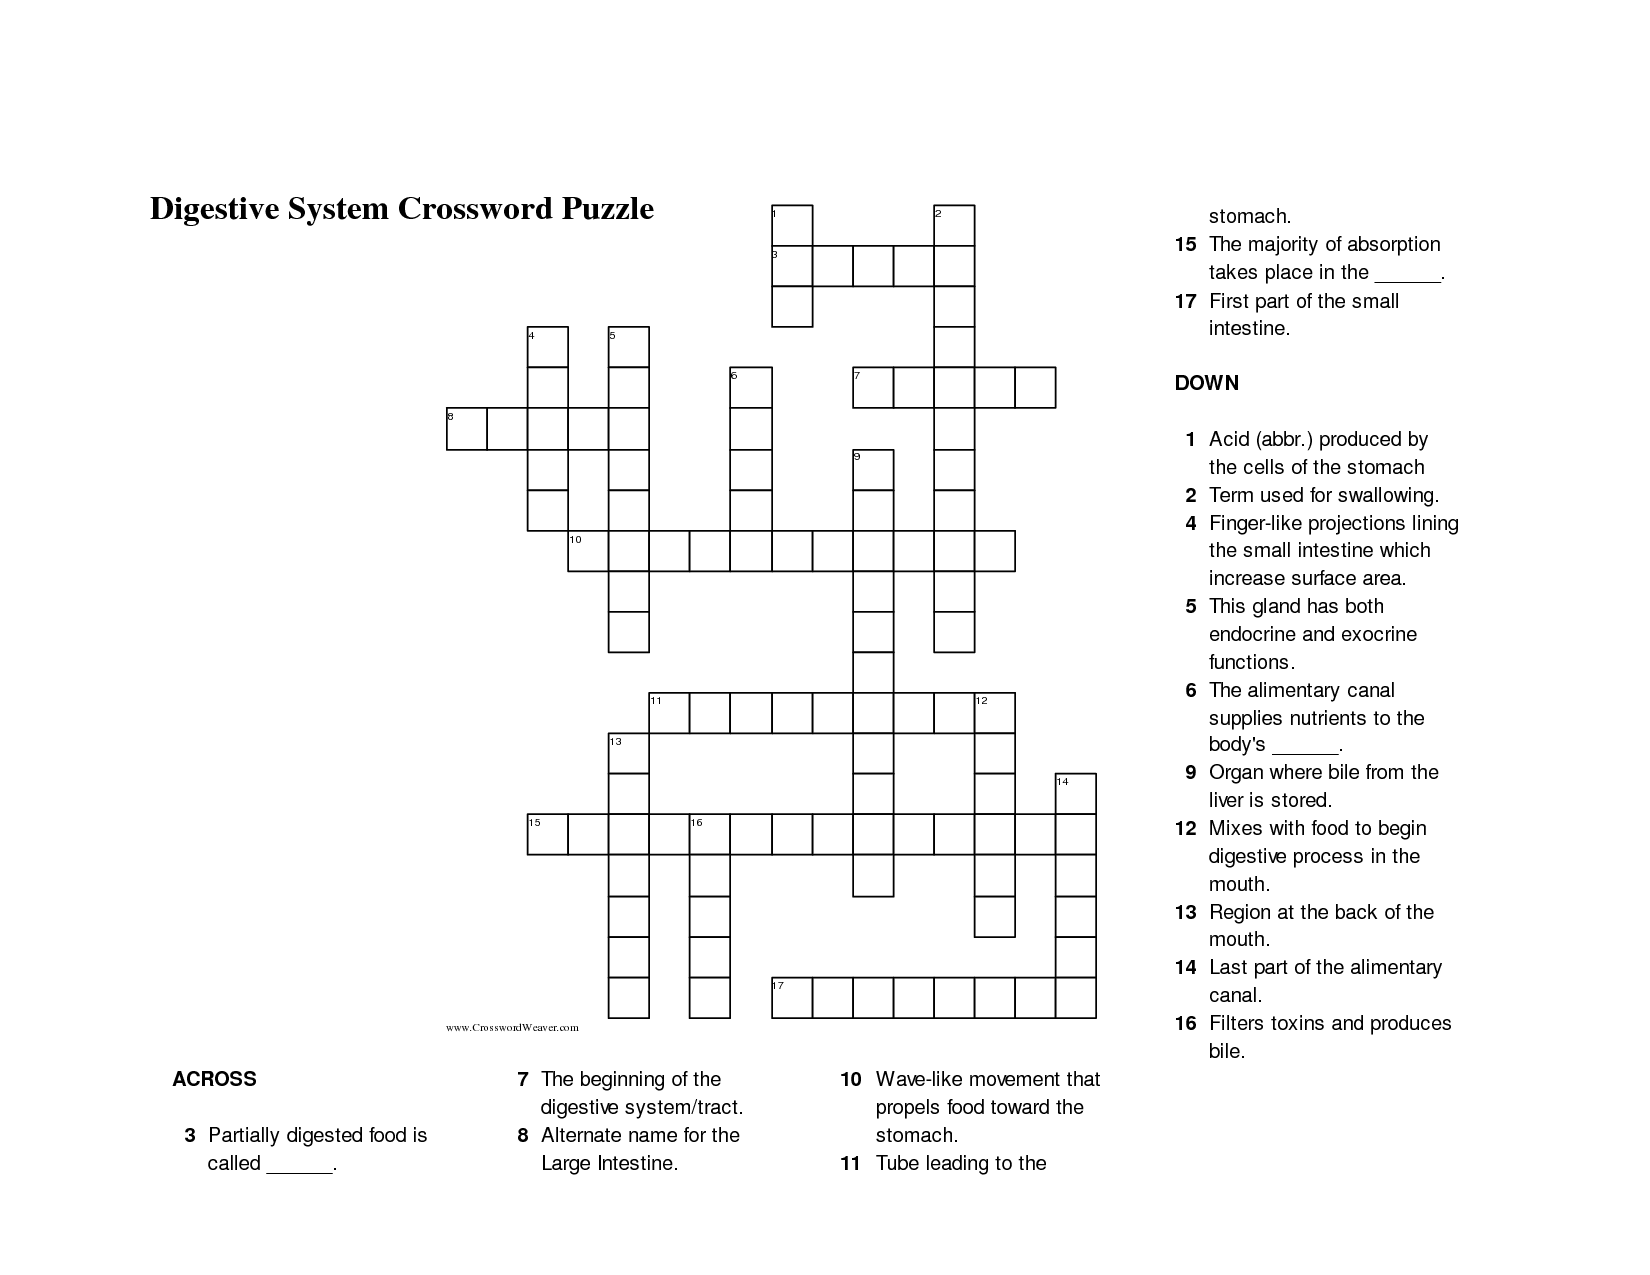 Digestive System Crossword Puzzle Image